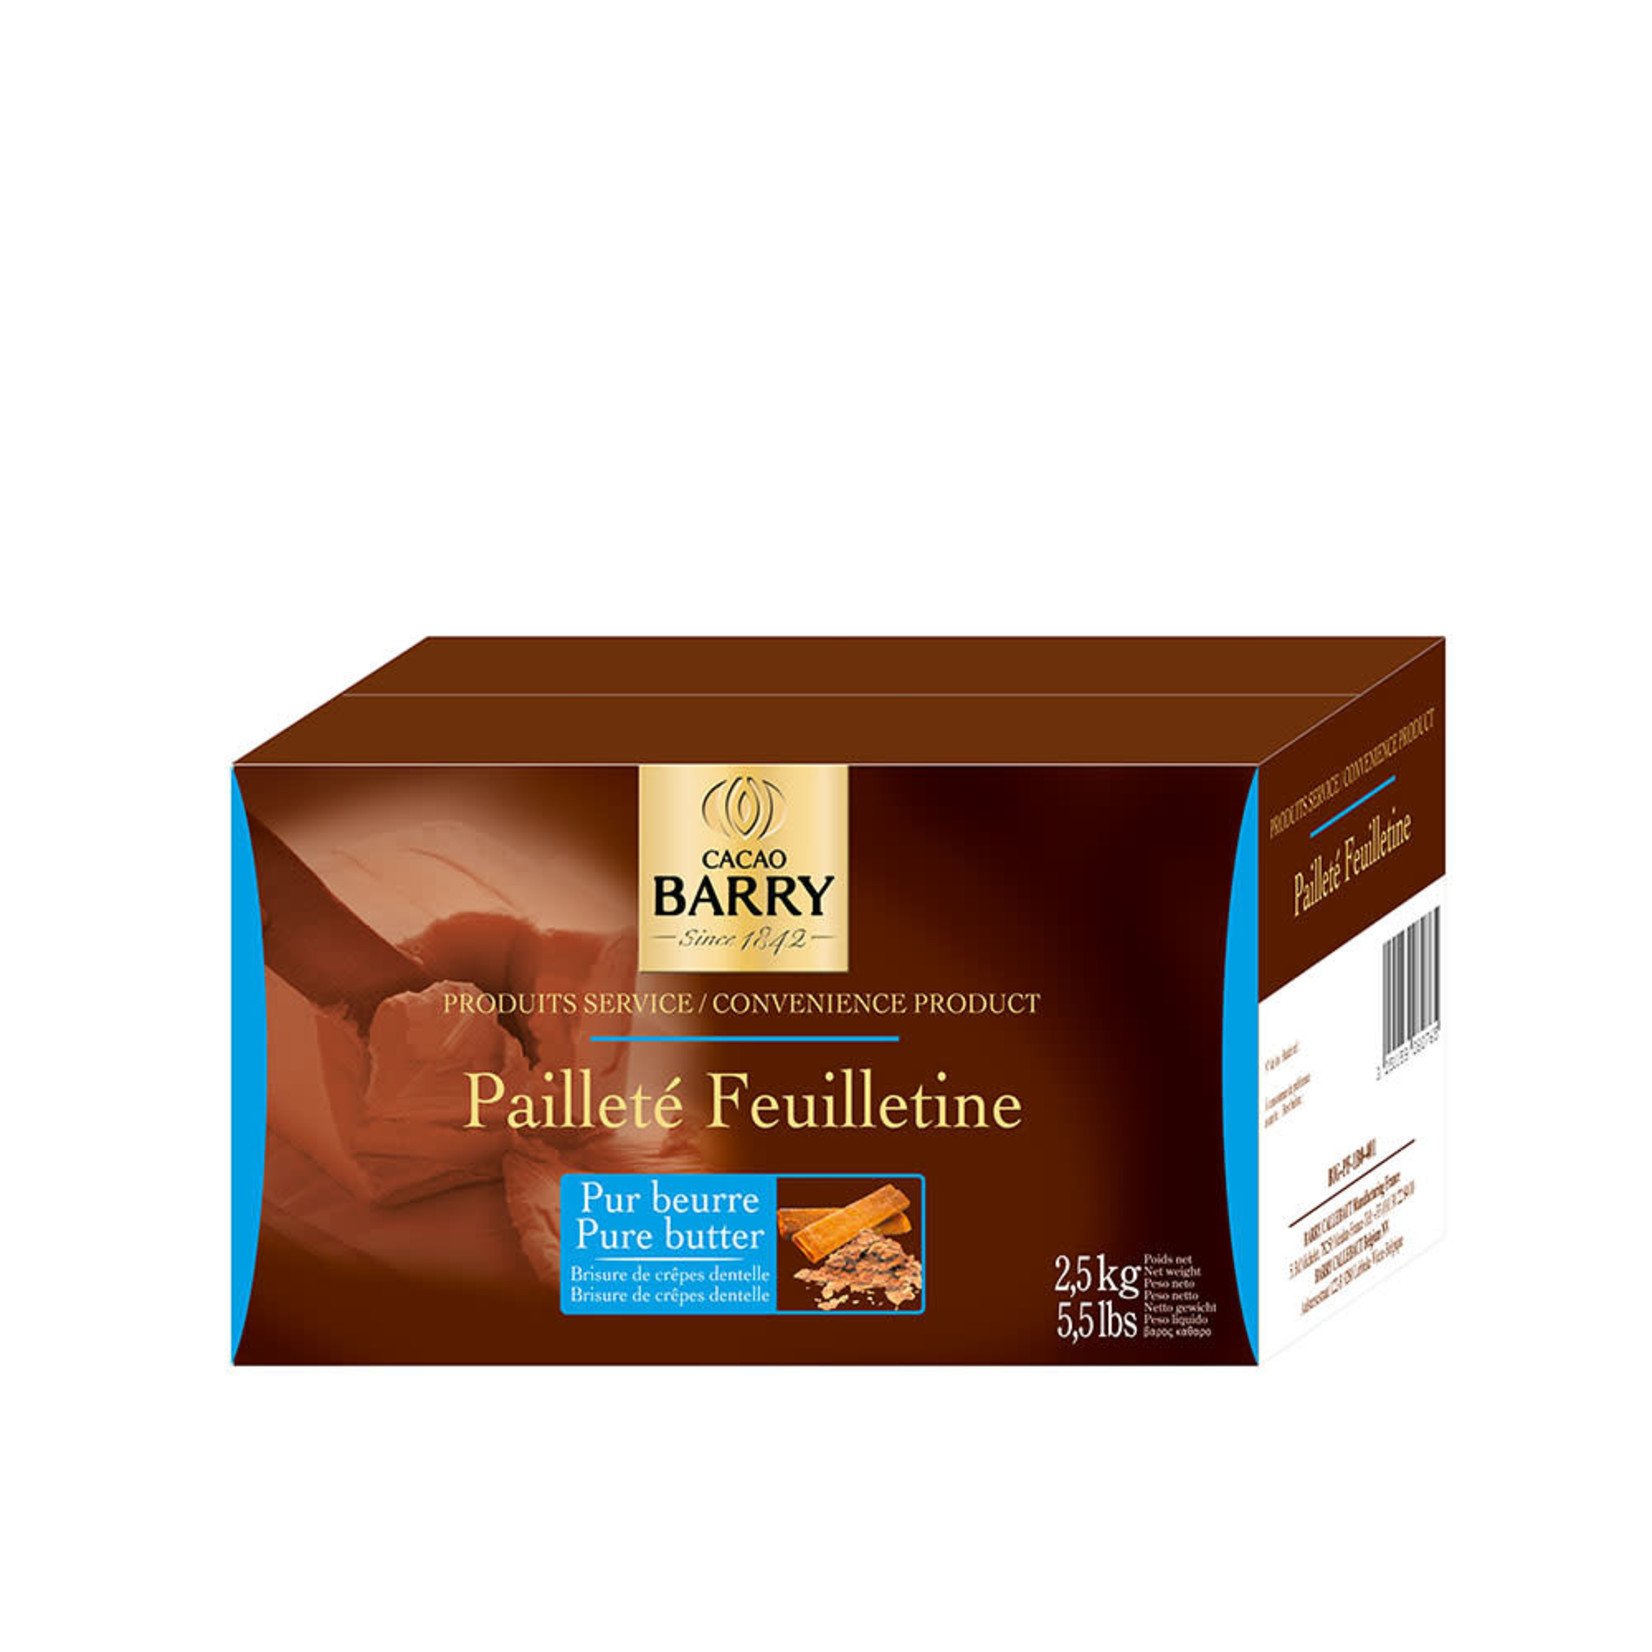 Cacao Barry Cacao Barry - Paillete Feuilletine - 5.5 lb